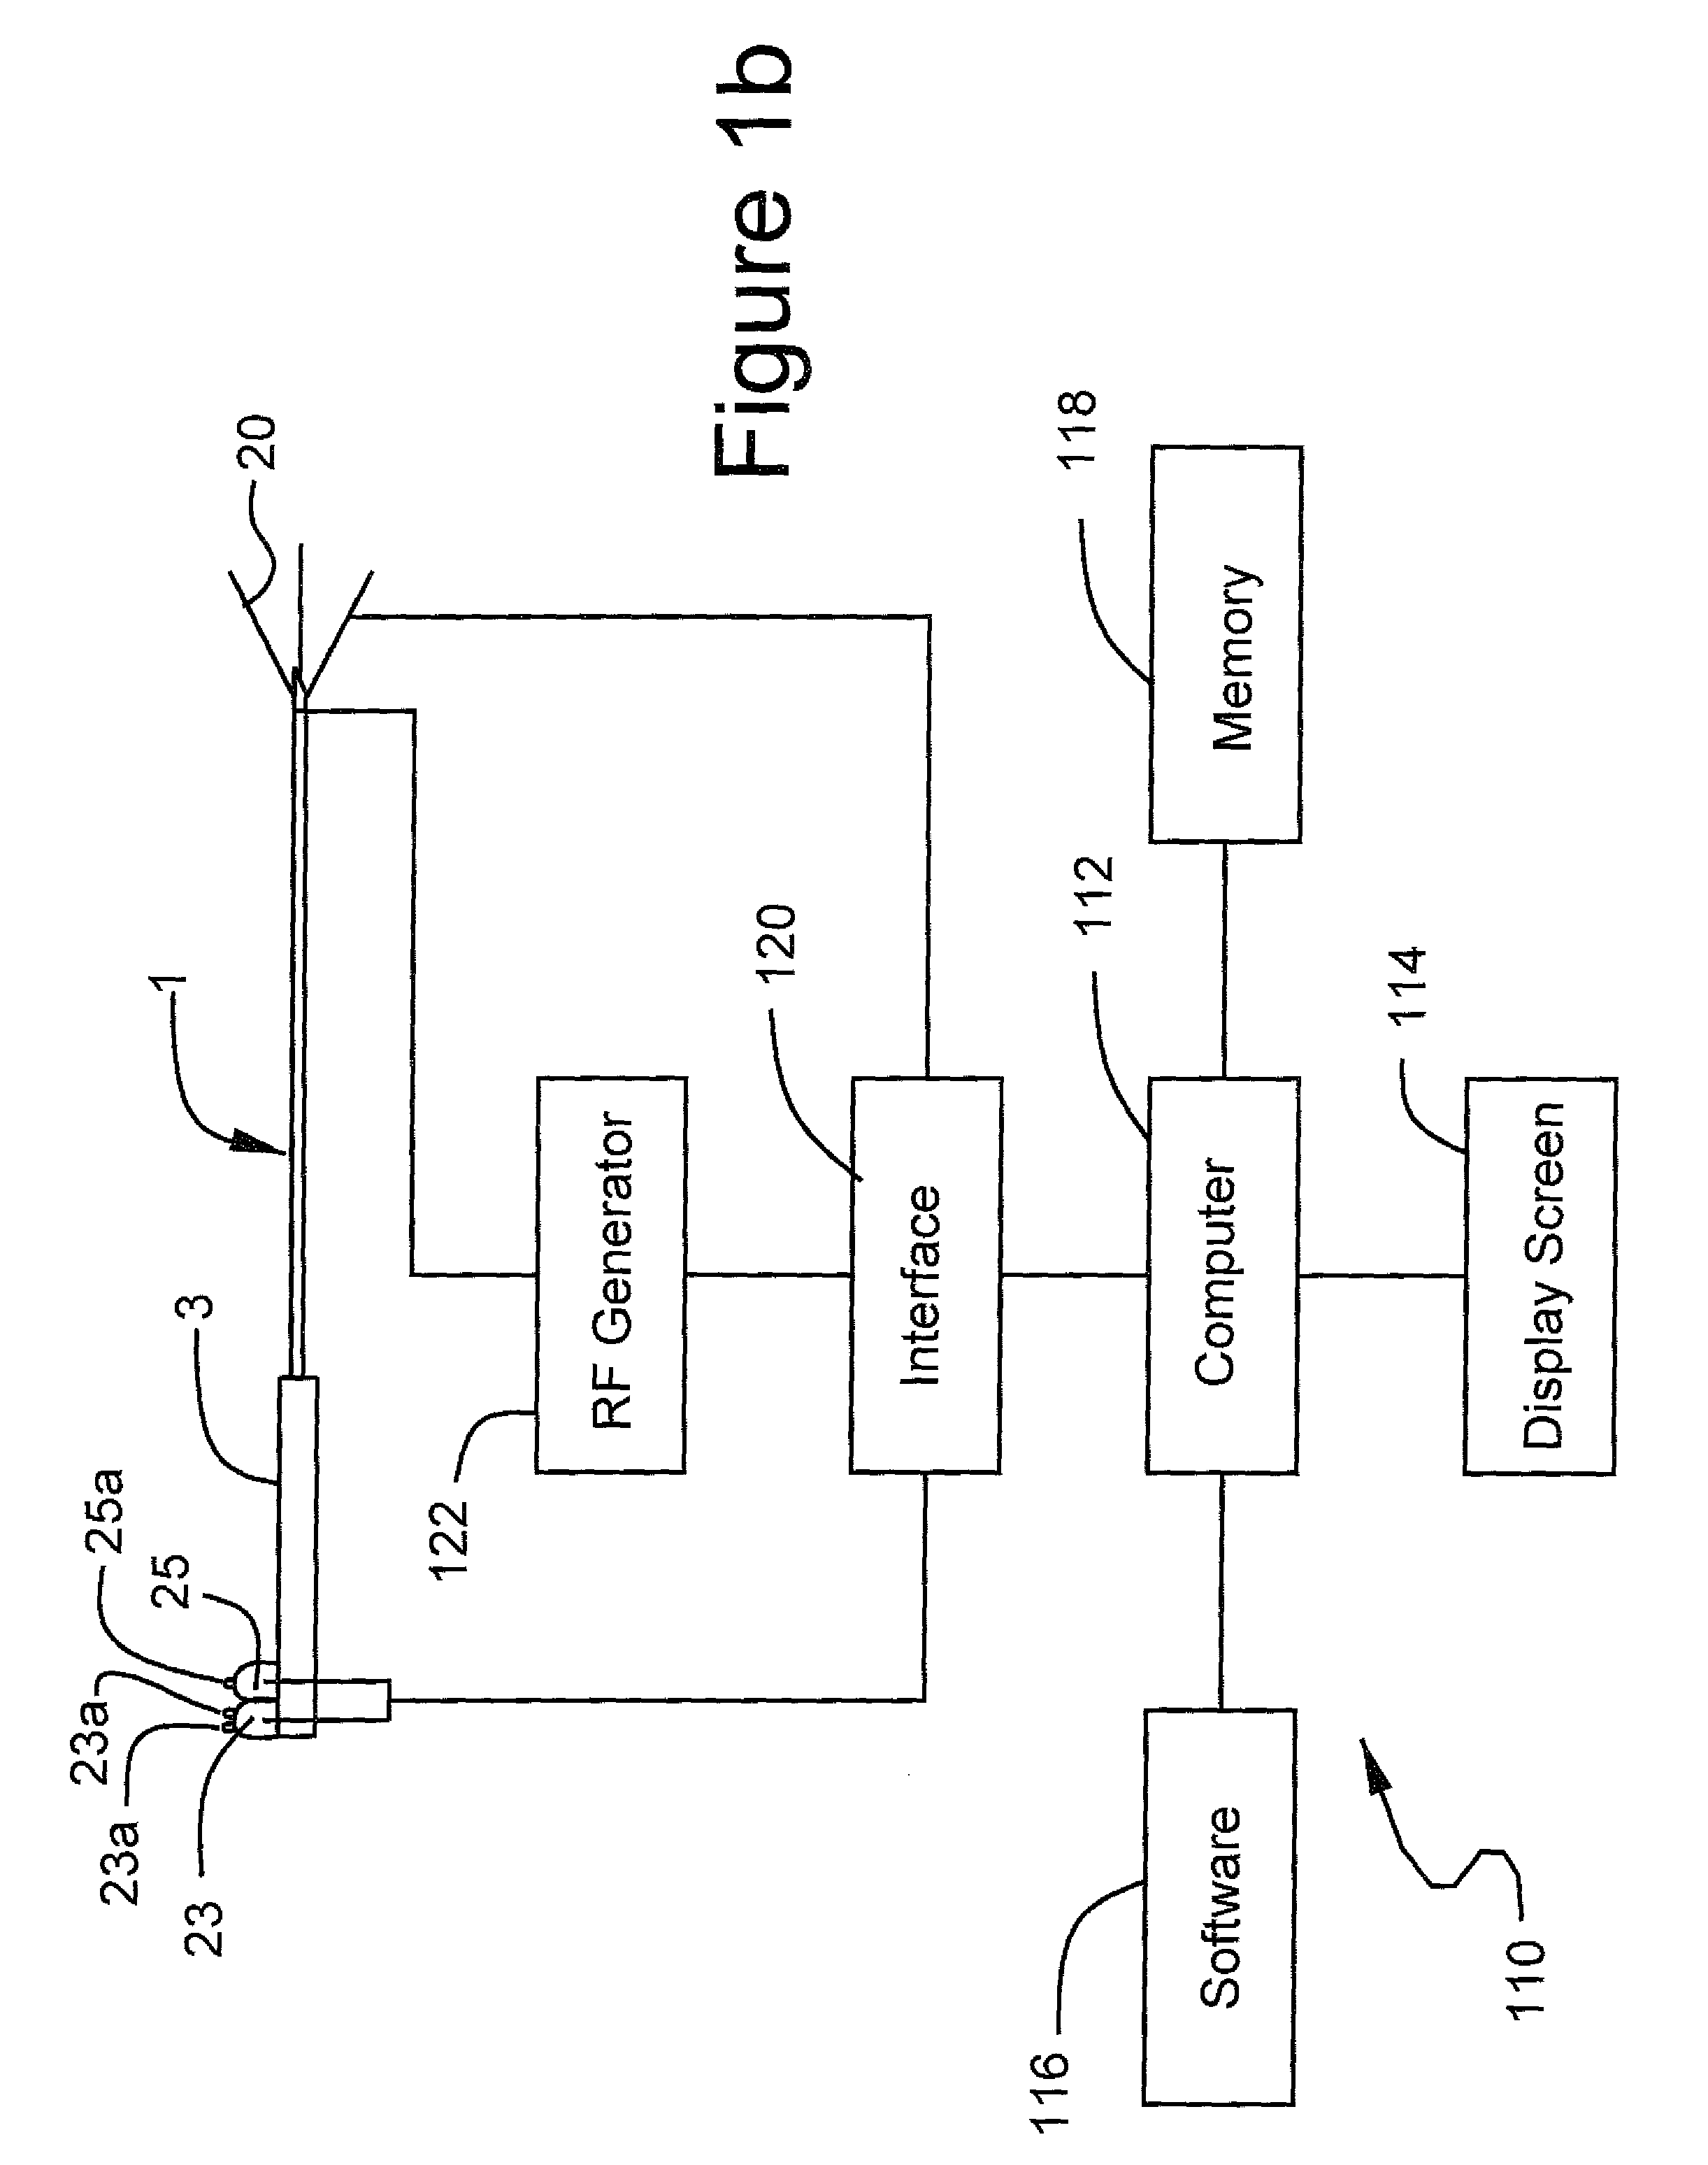 User interface and navigational tool for remote control of an anchored RF ablation device for destruction of tissue masses